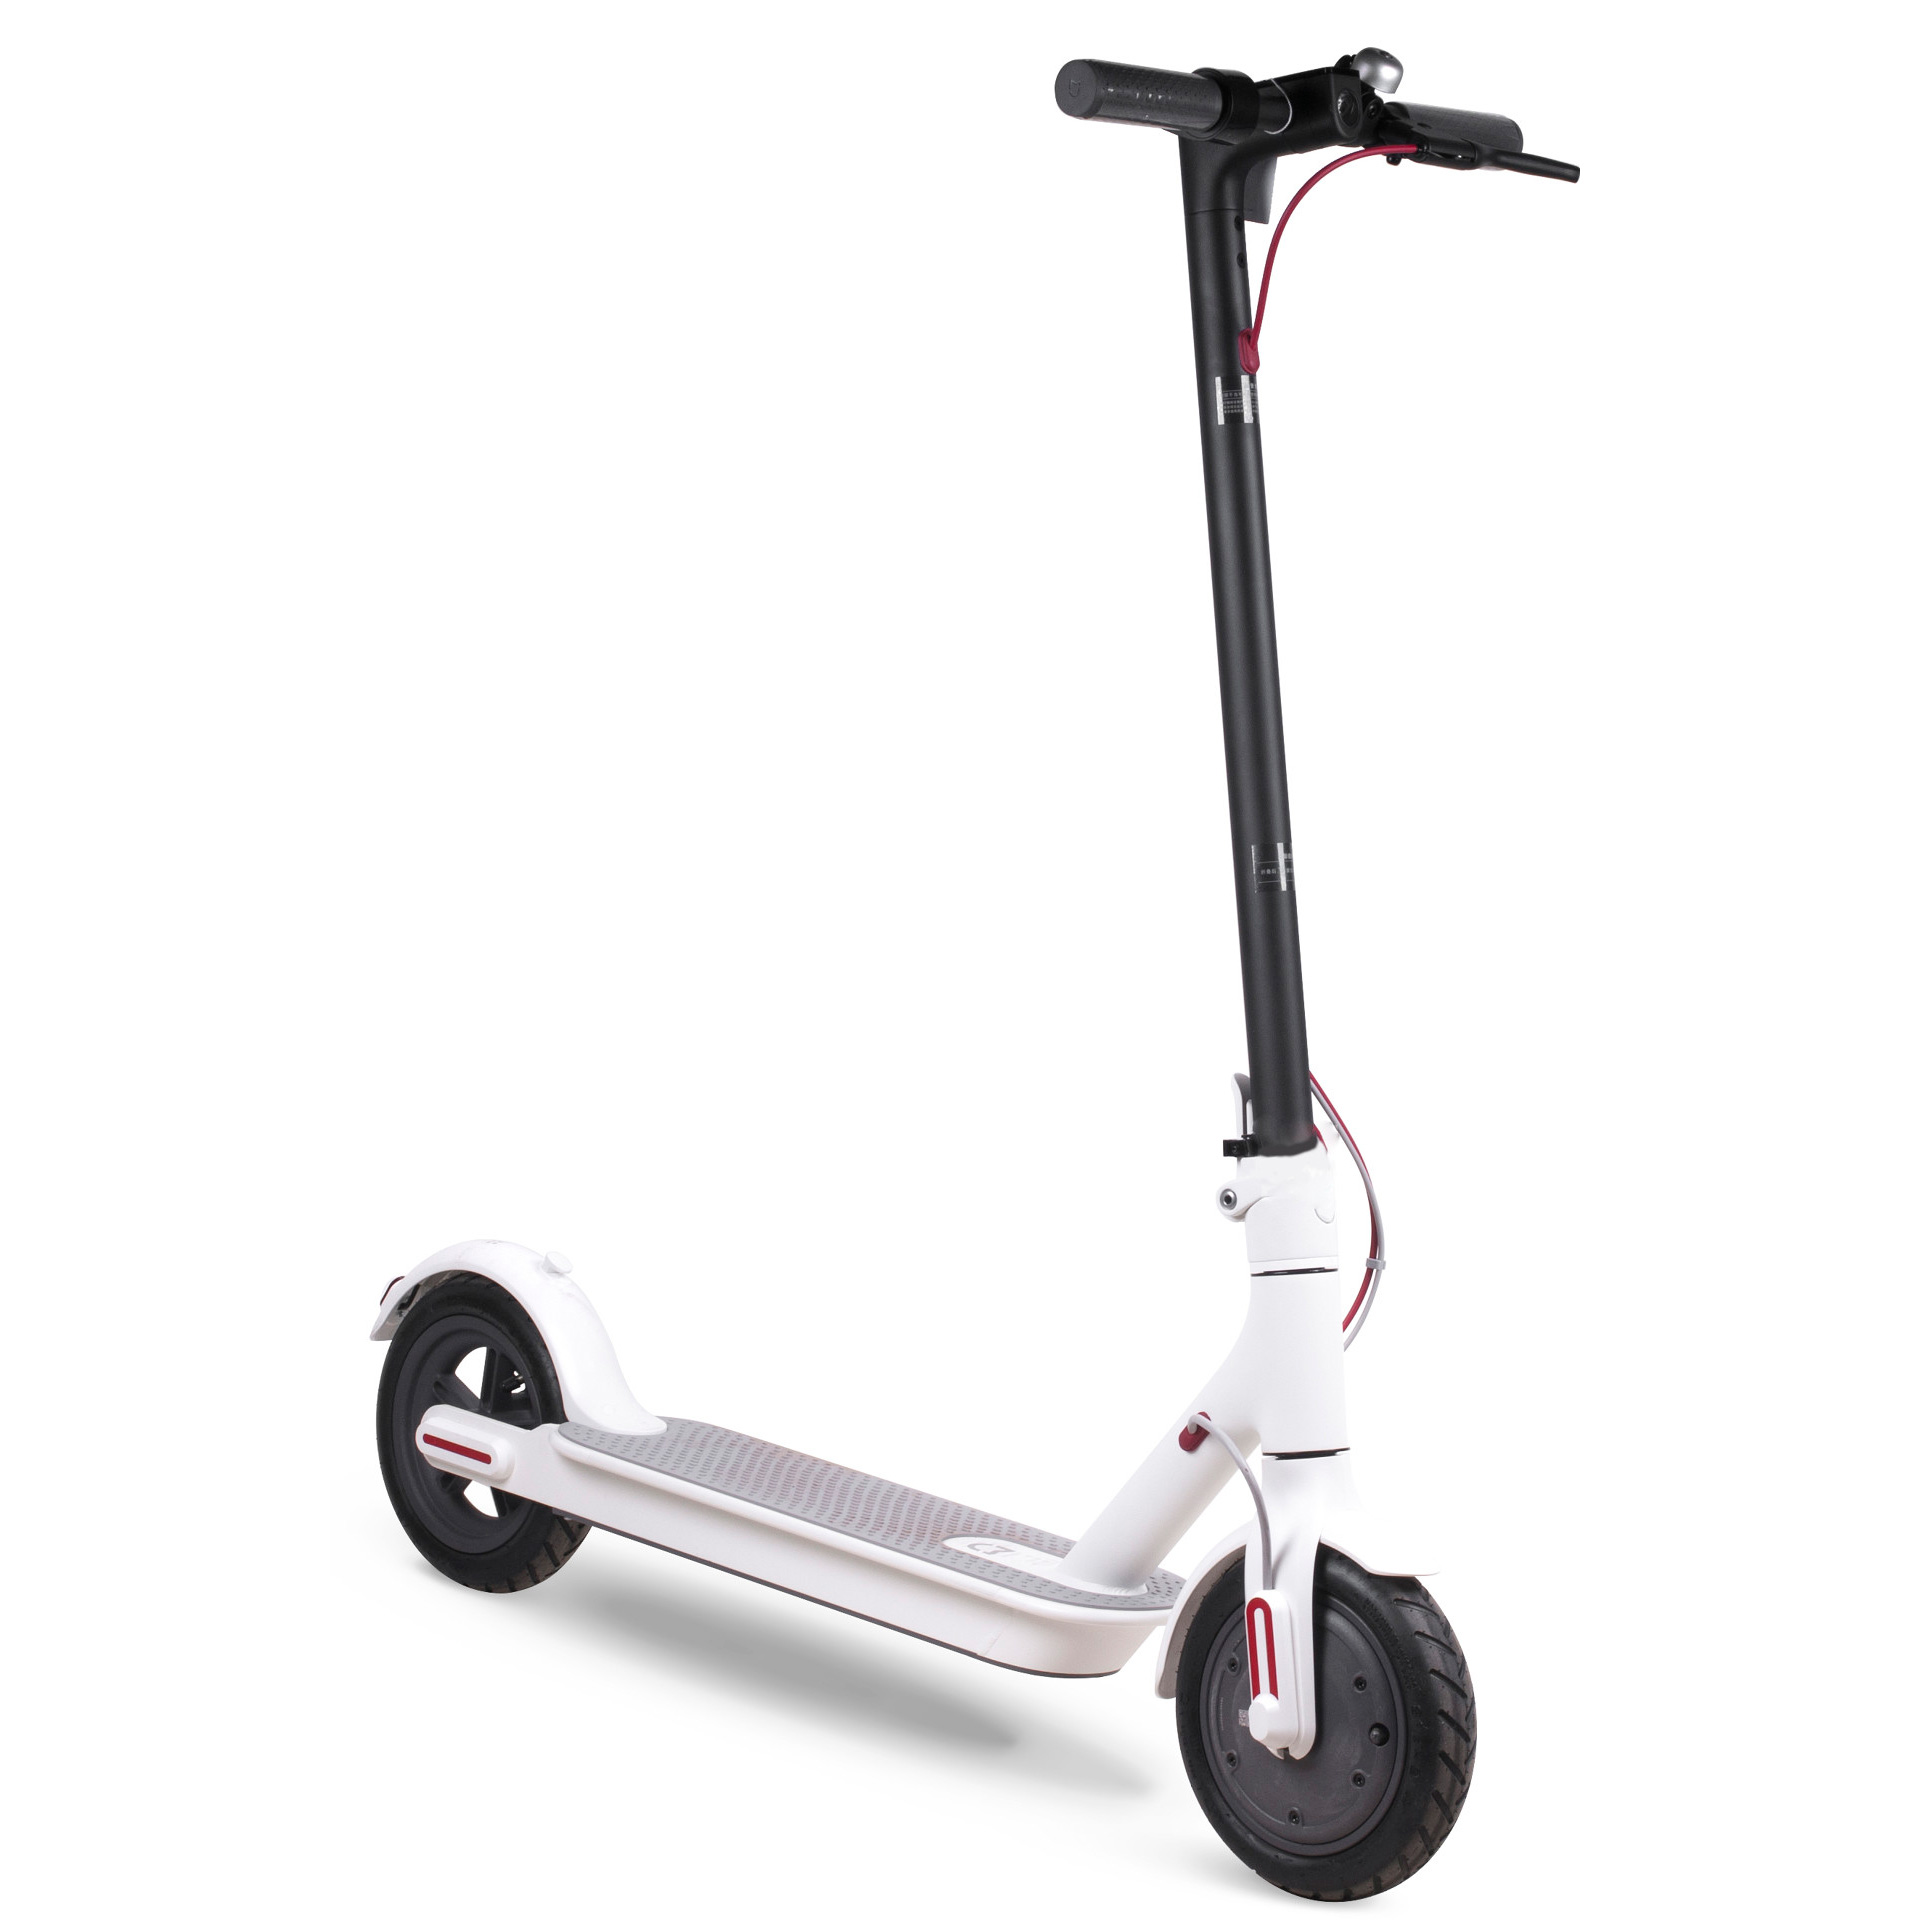 MiJia Electric Scooter white 3